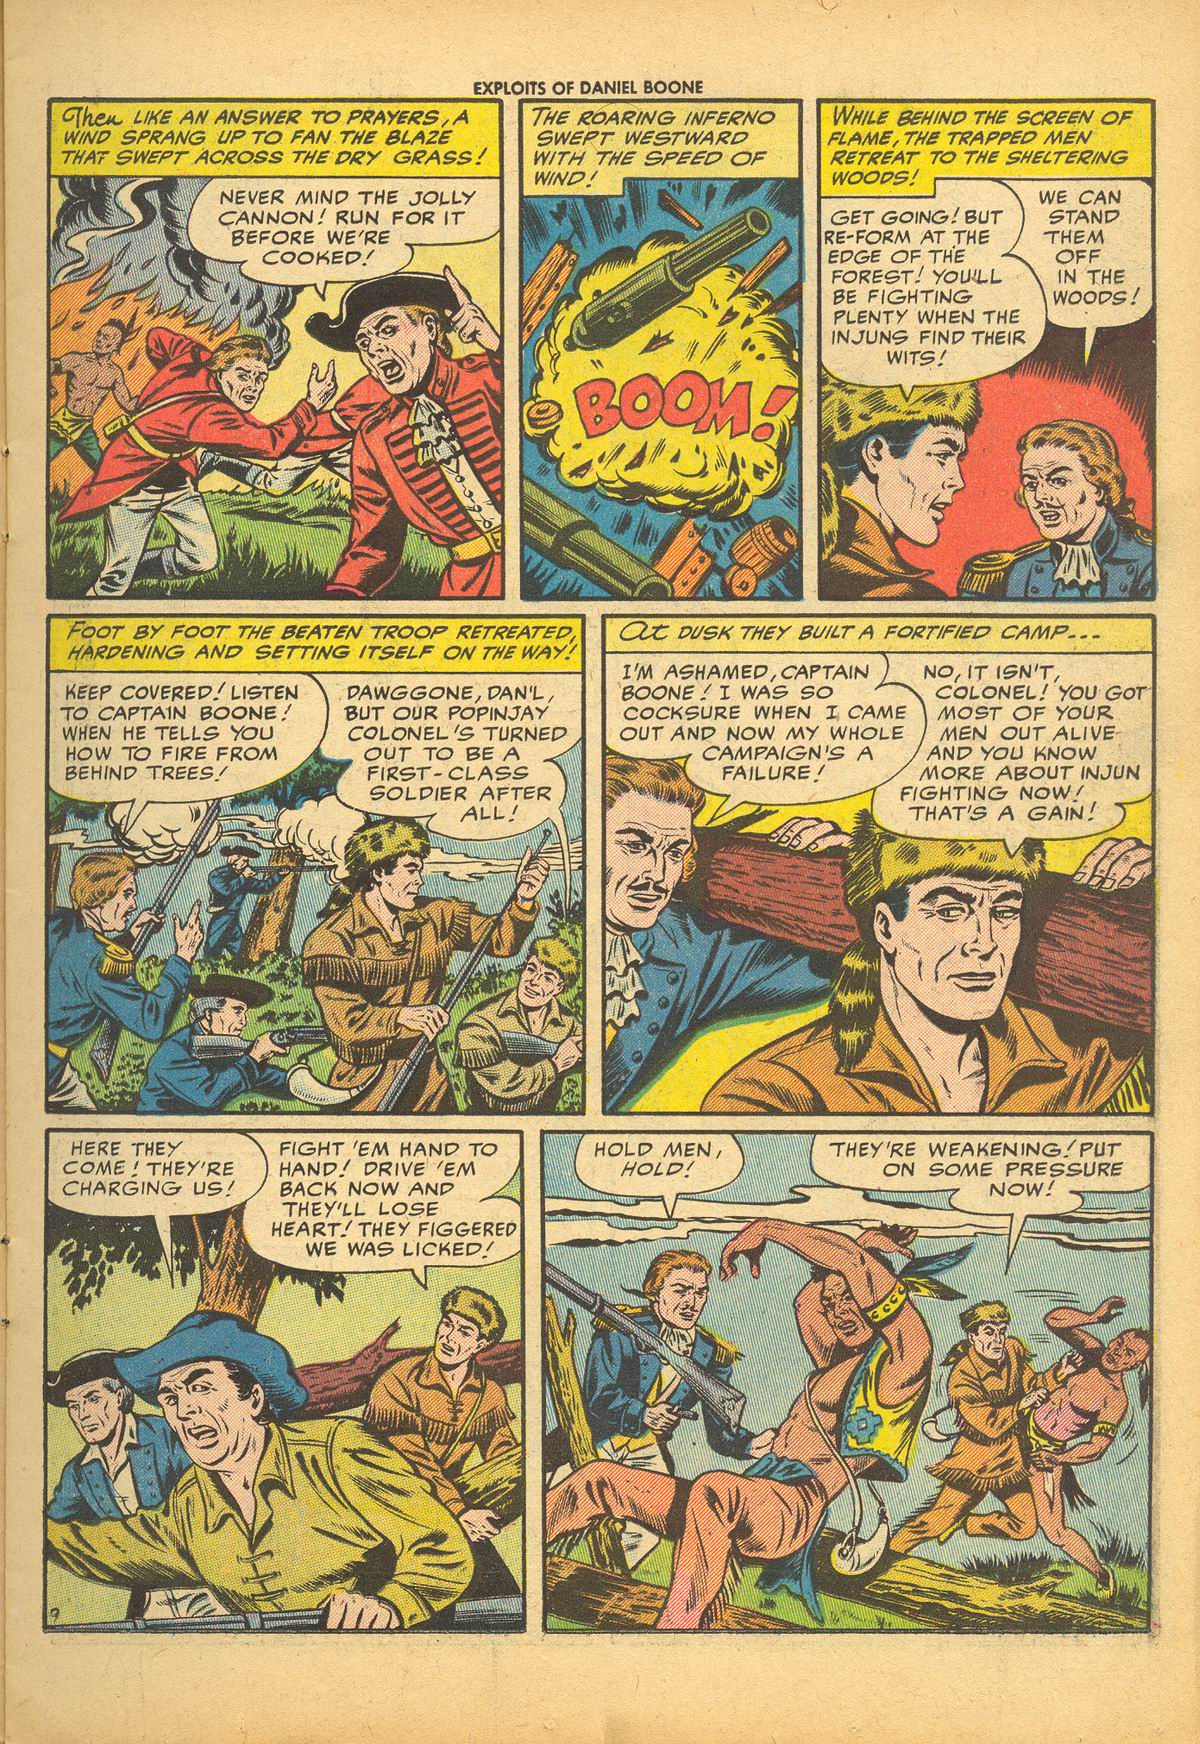 Read online Exploits of Daniel Boone comic -  Issue #3 - 11